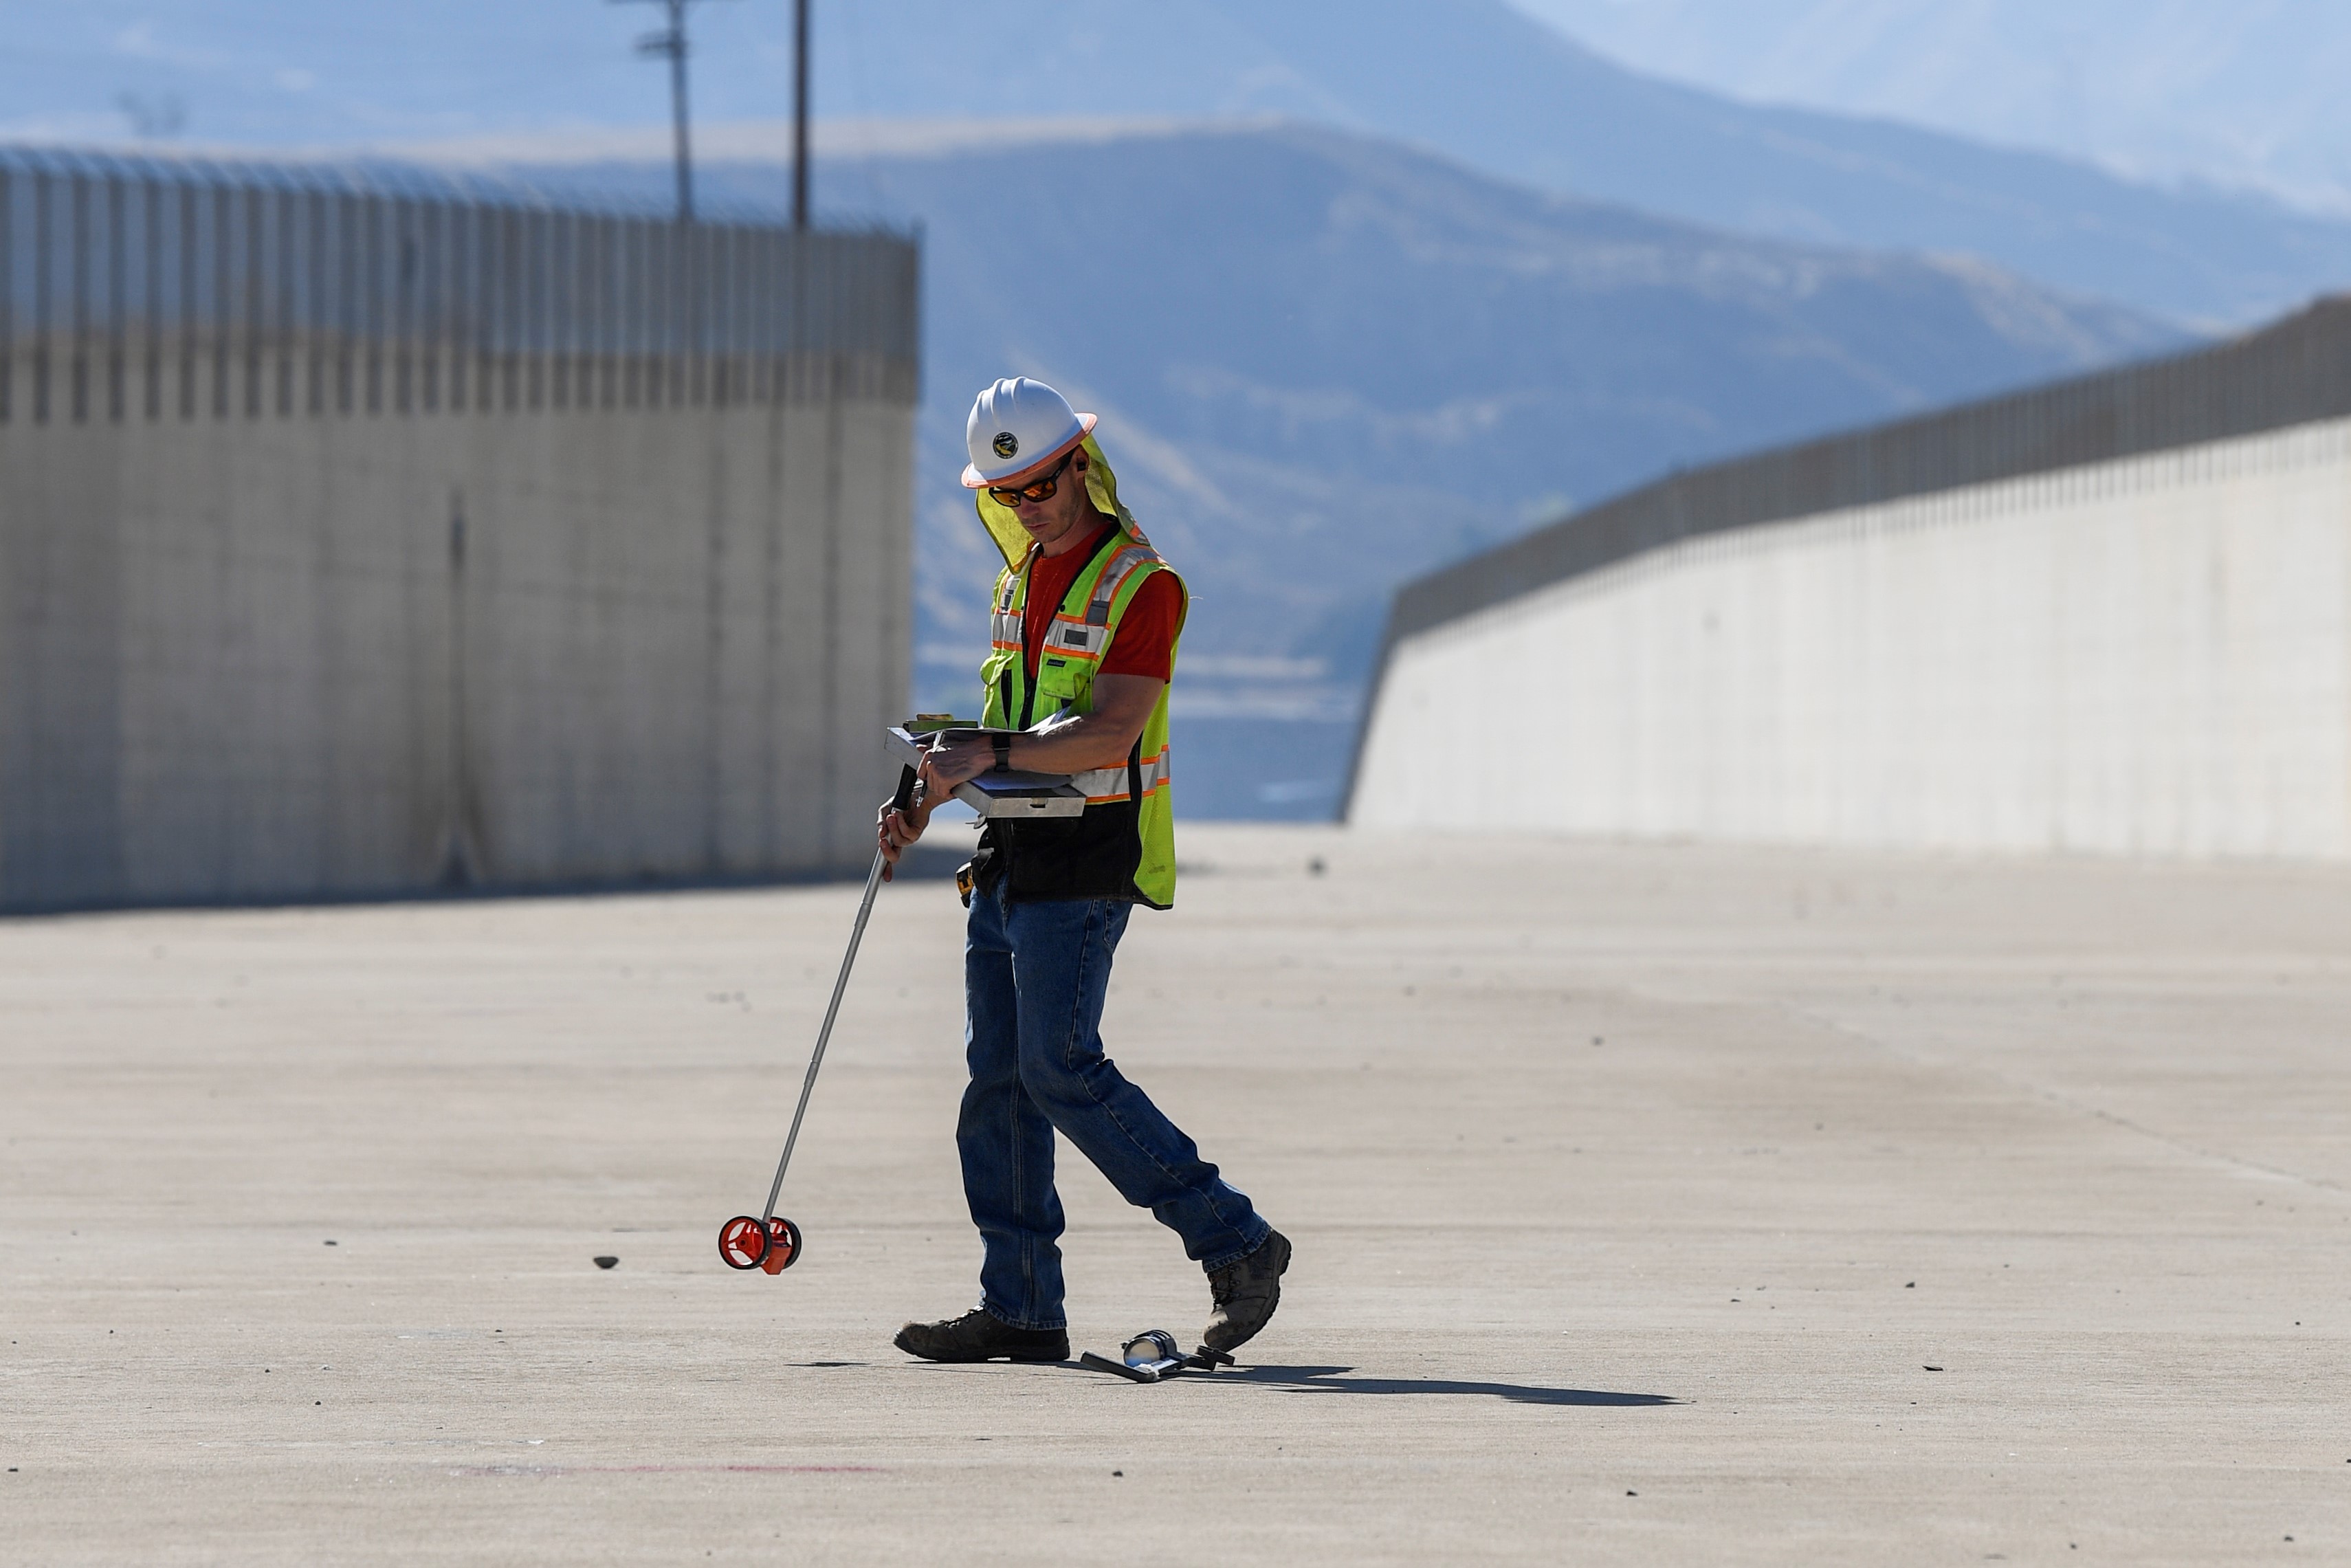 DWR engineering geologist Chris Silva marks drill hole locations for initial assessments at Castaic Dam’s spillway in Los Angeles County.